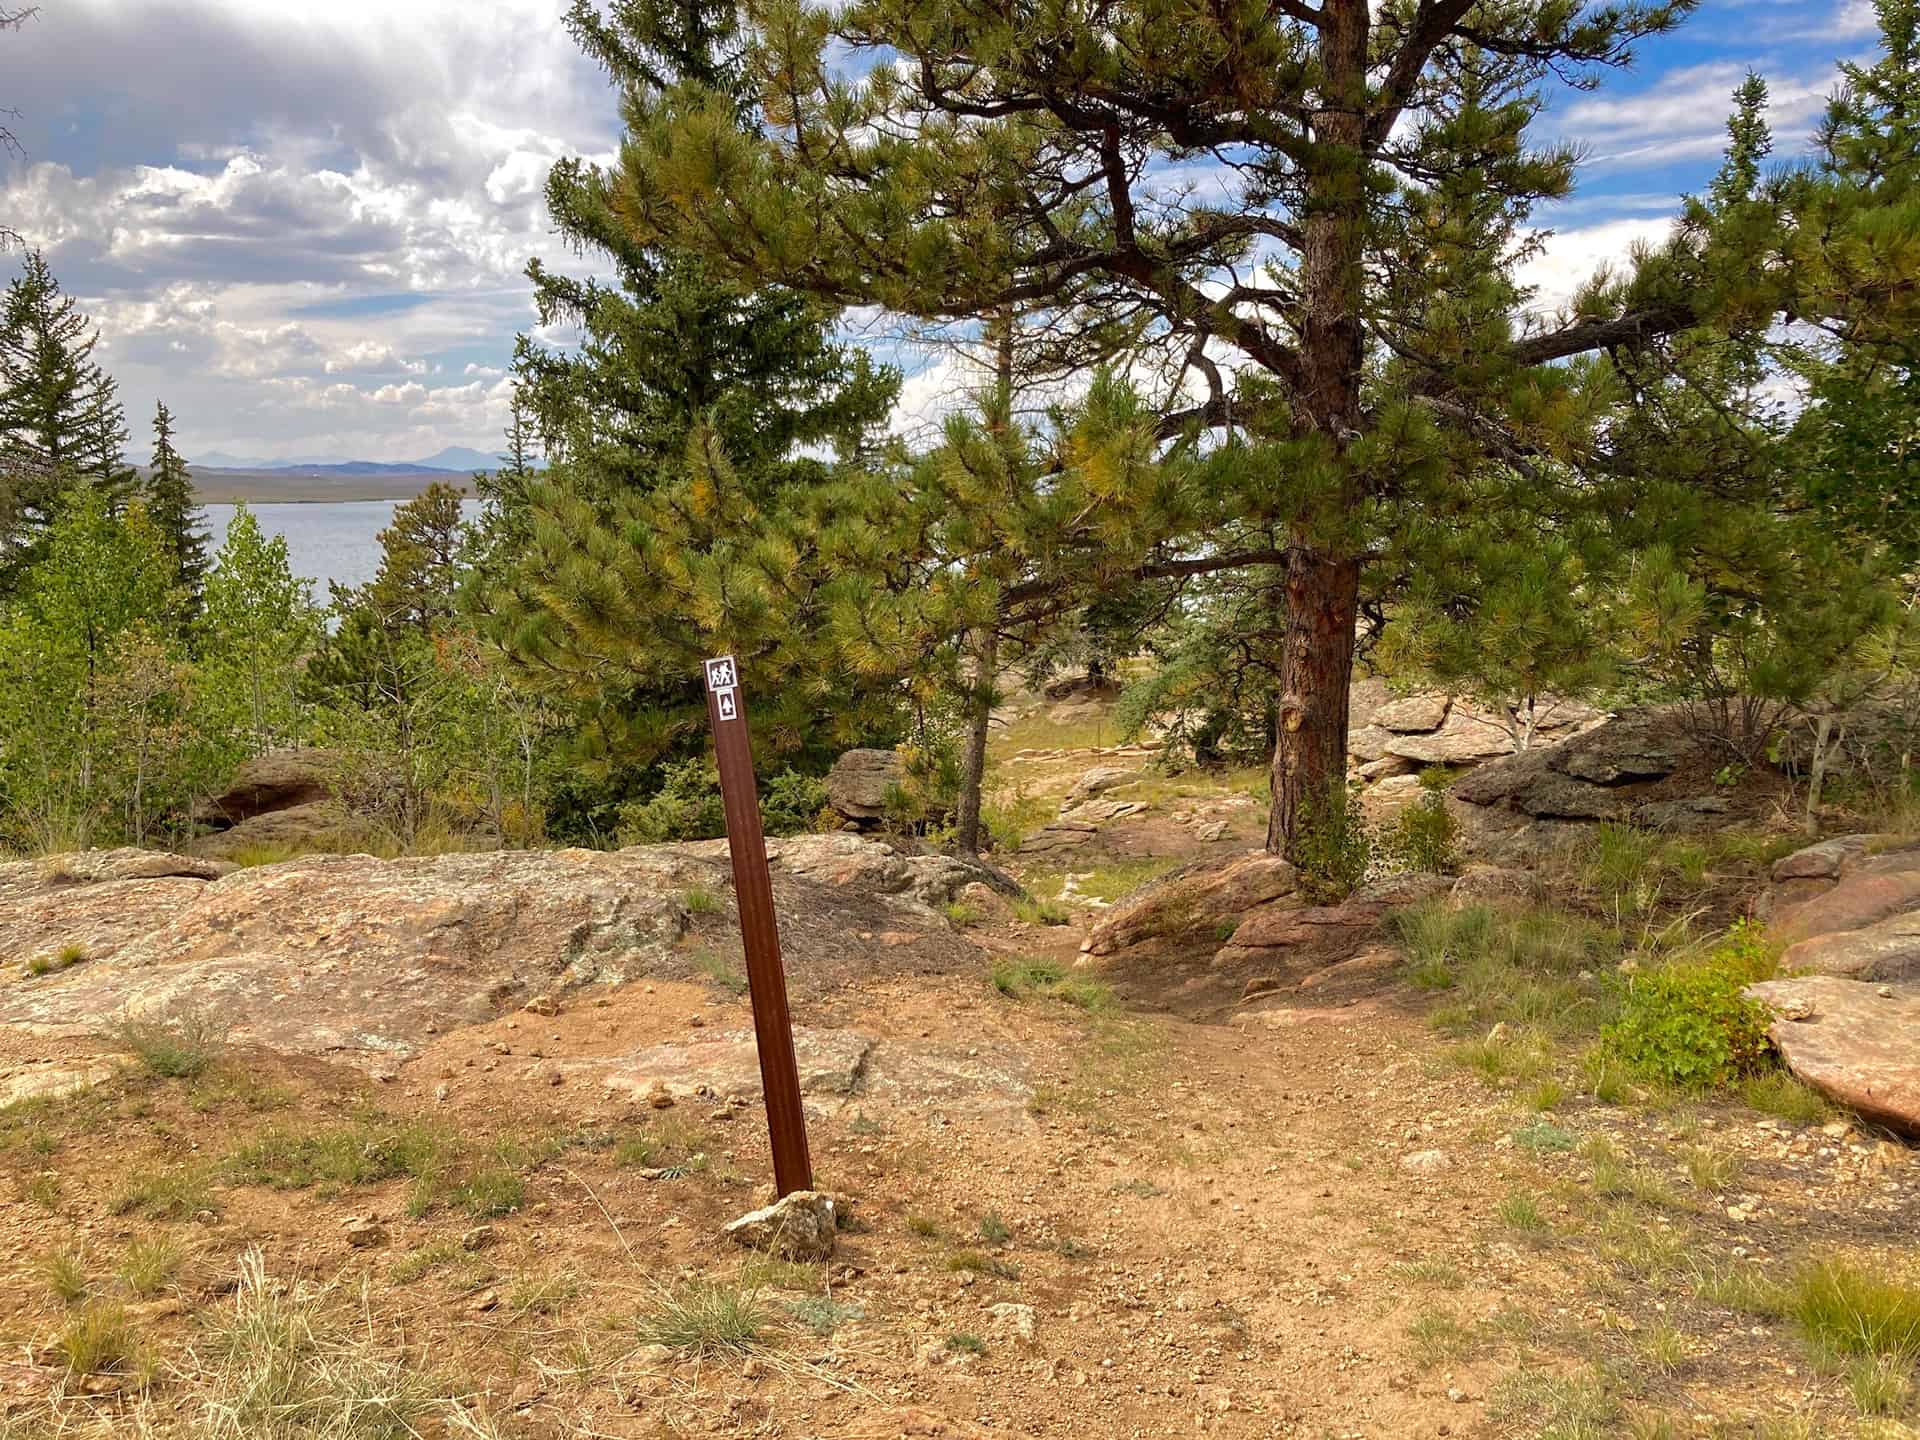 sign with hiker symbol